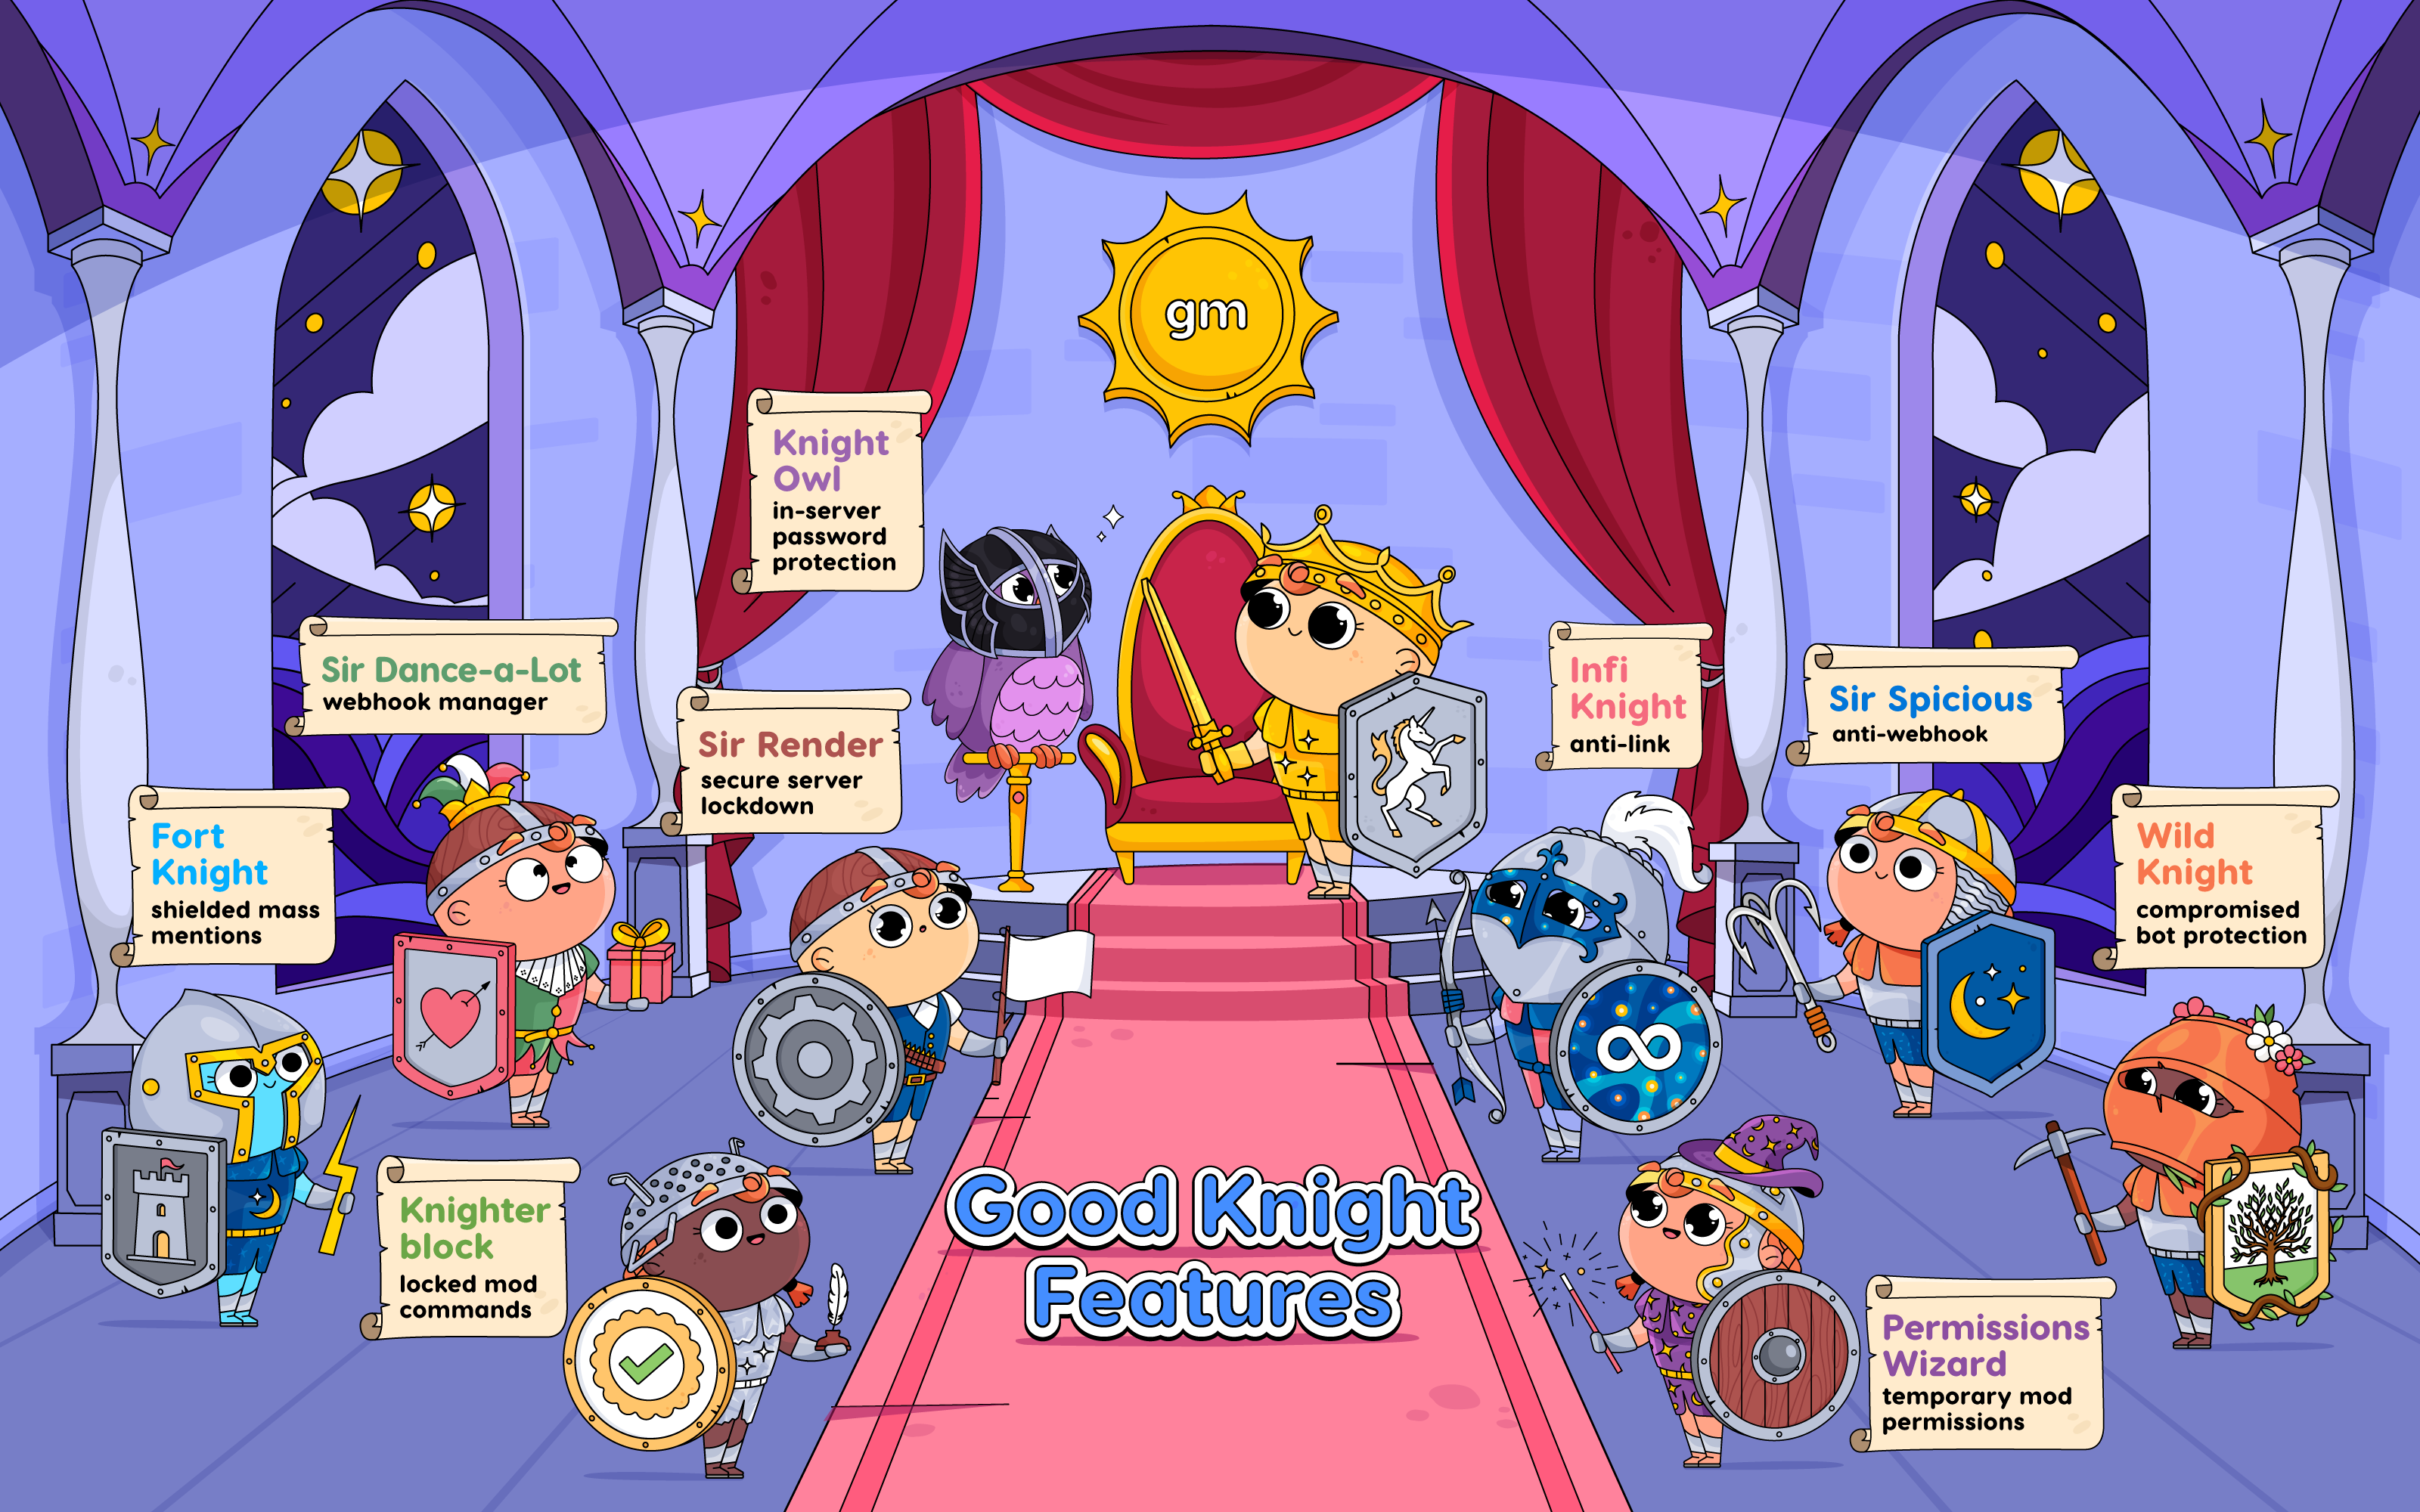 Good Knight features